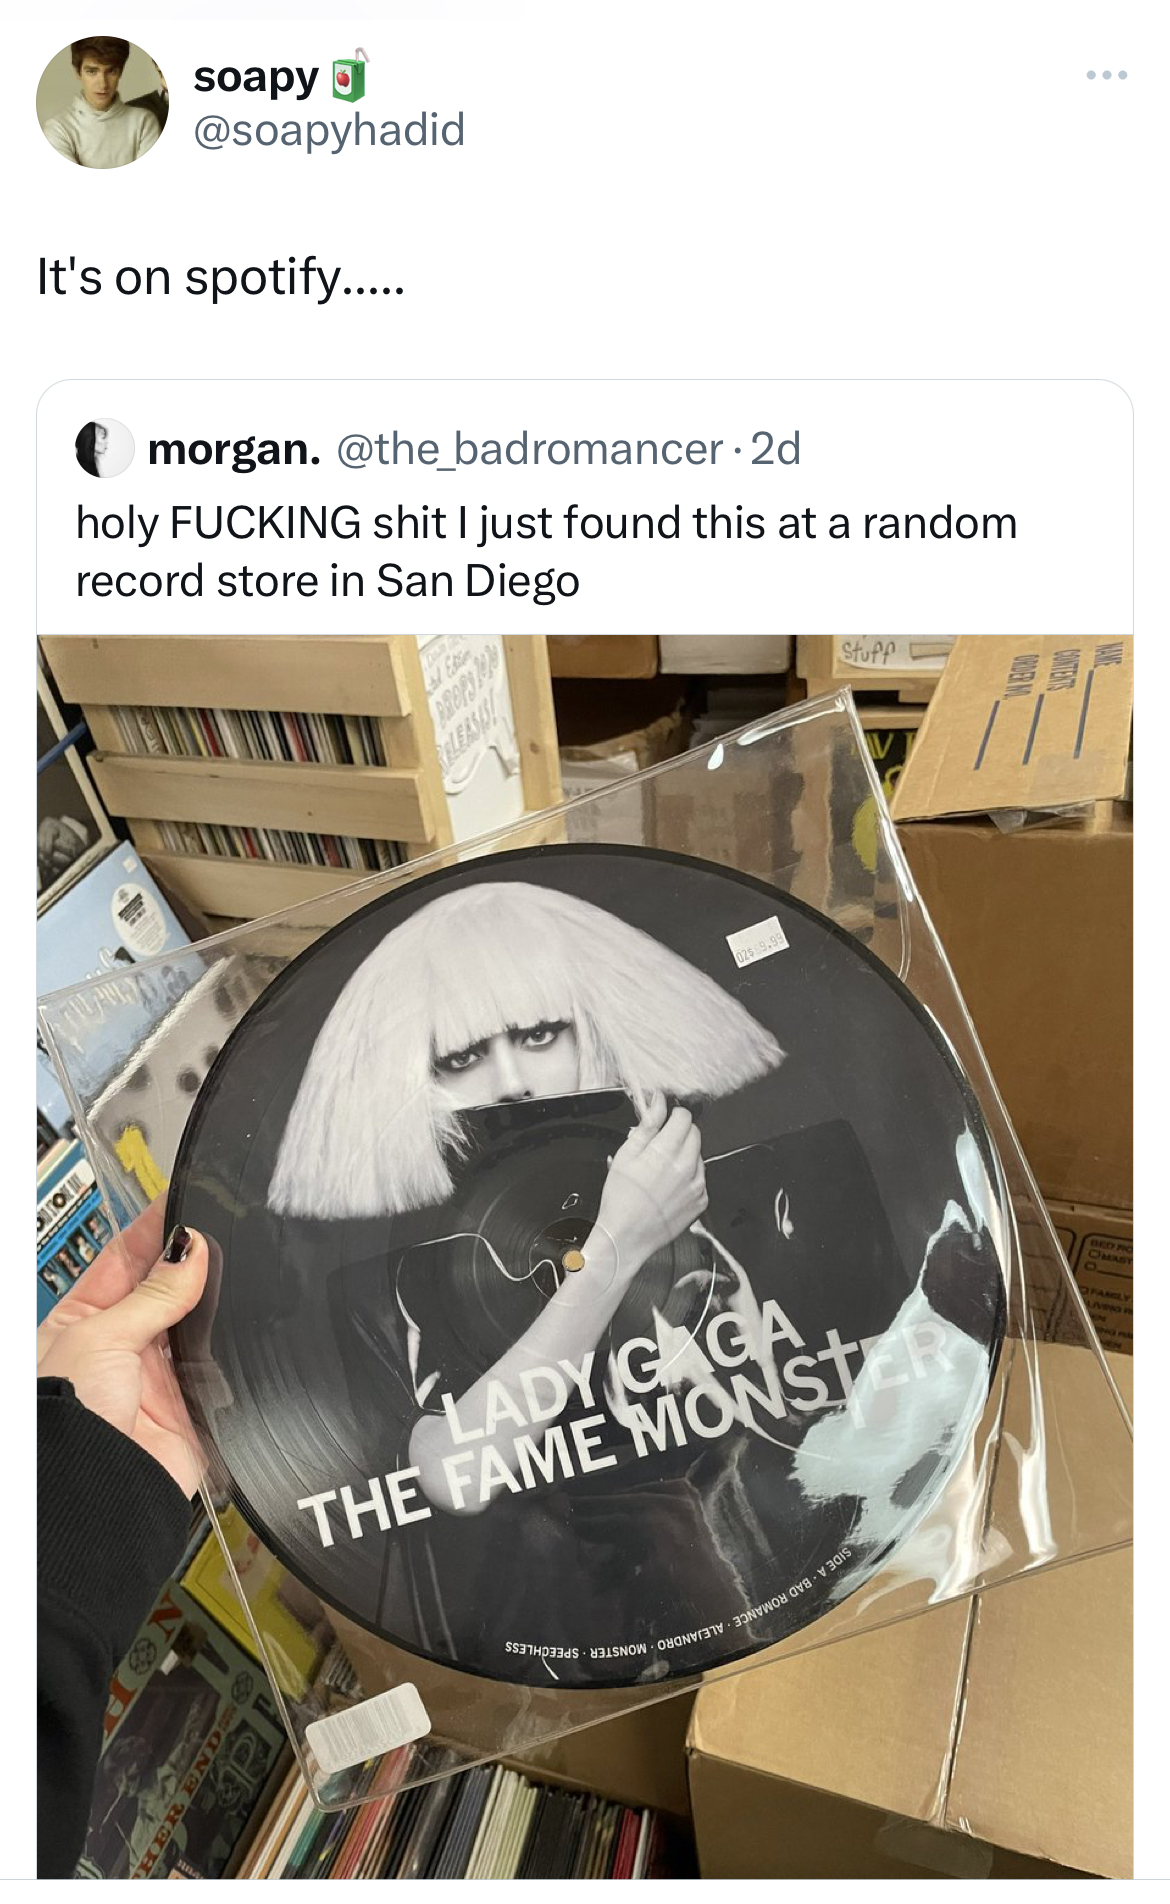 Unhinged Tweets - soapy It's on spotify..... morgan. holy Fucking shit I just found this at a random record store in San Diego Lady Gaga The Fame Monst